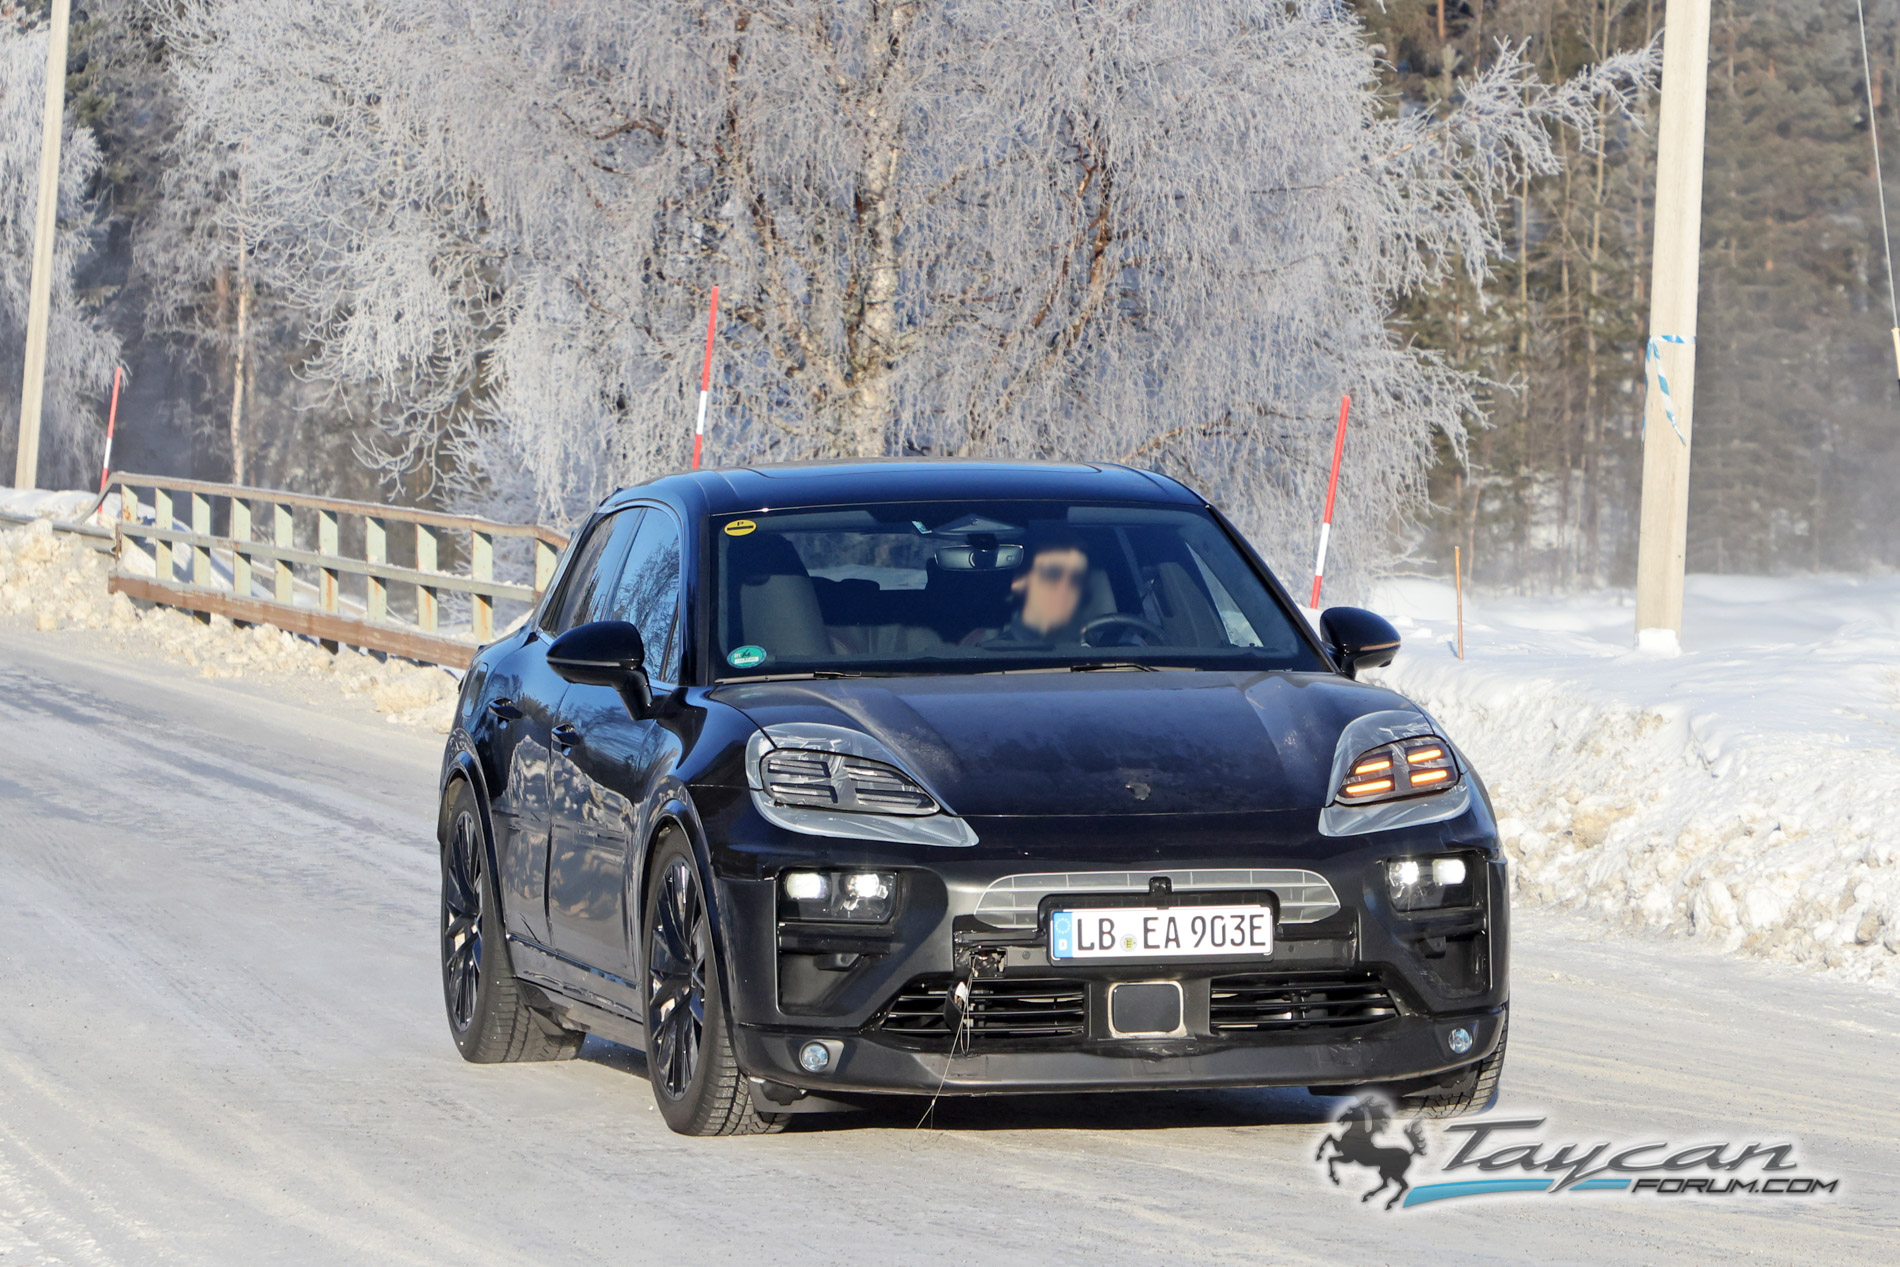 Macan EV Macan EV Interior Spied Uncovered! + Latest Cold Climate Testing Photos Porsche Macan 9